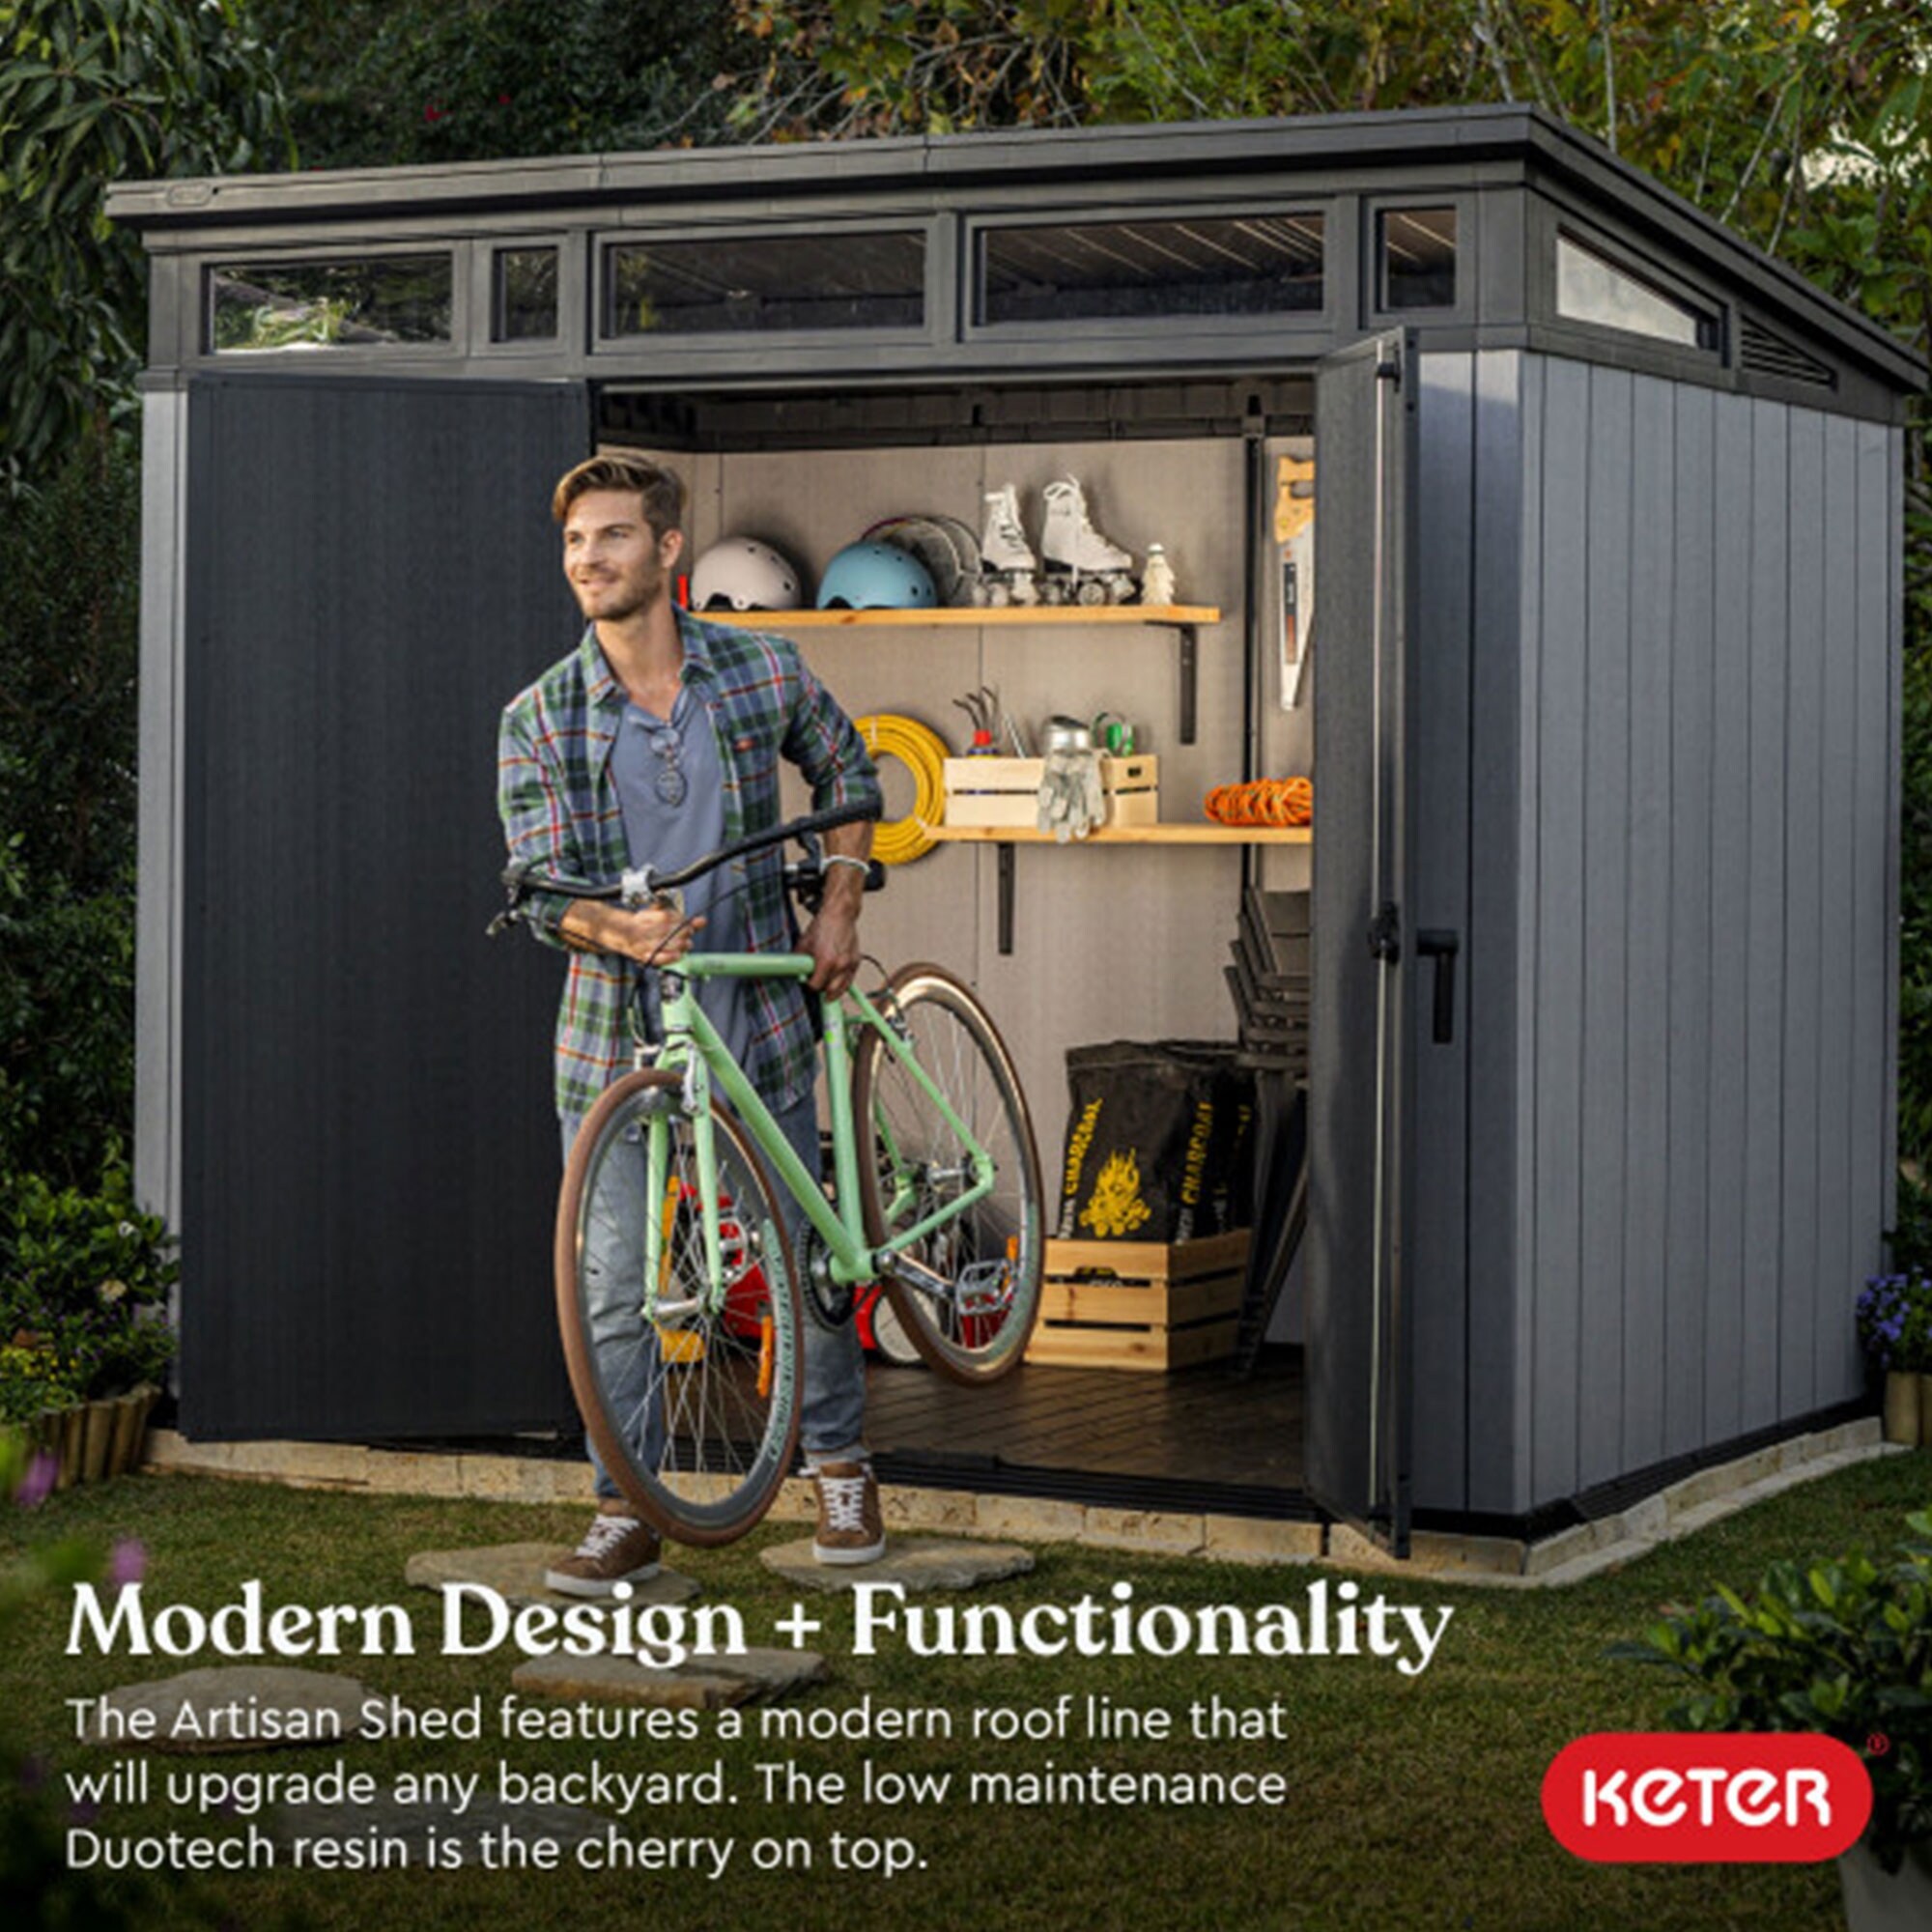 https://ak1.ostkcdn.com/images/products/is/images/direct/7594ad4f0513acc987c1f1bc5a7090a476fd5f3e/Keter-Artisan-9x7-Foot-Large-Outdoor-Shed-with-Floor-with-Modern-Design%2C-Grey.jpg